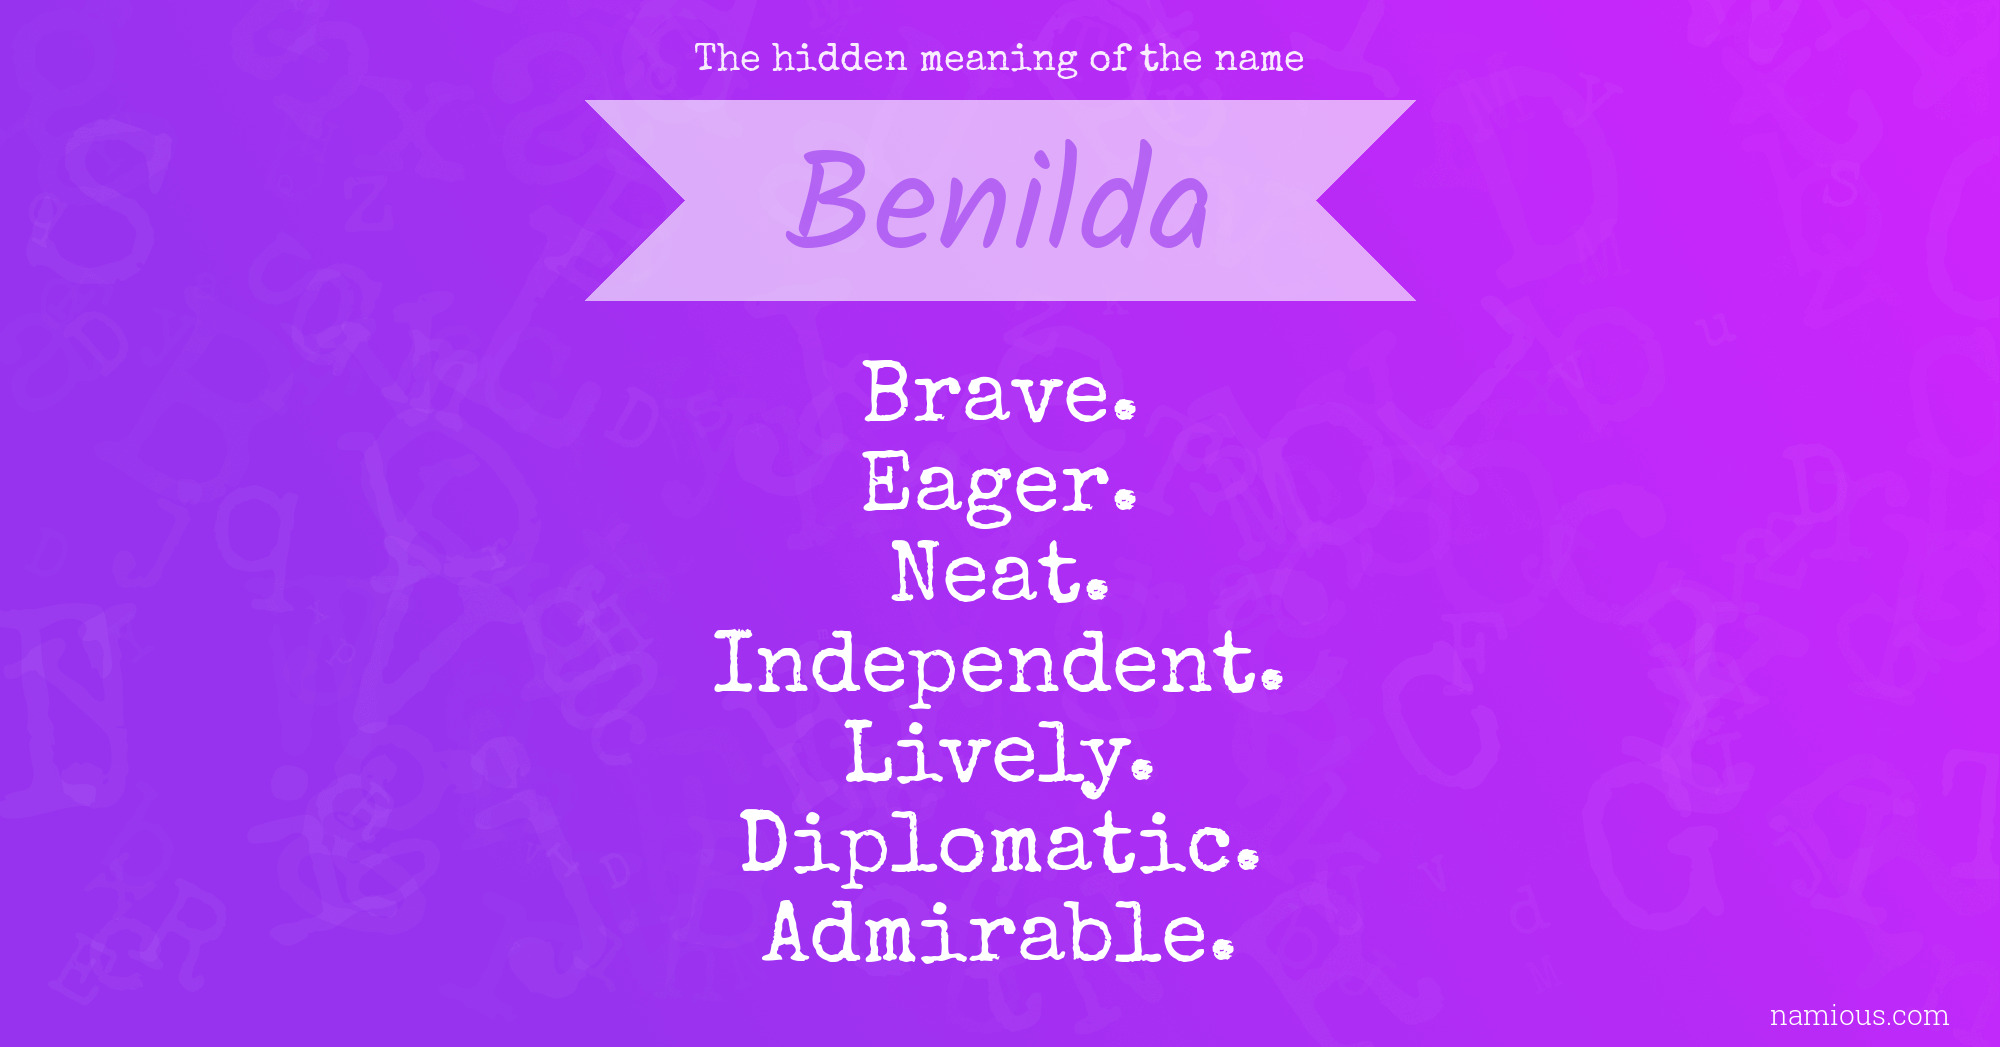 The hidden meaning of the name Benilda